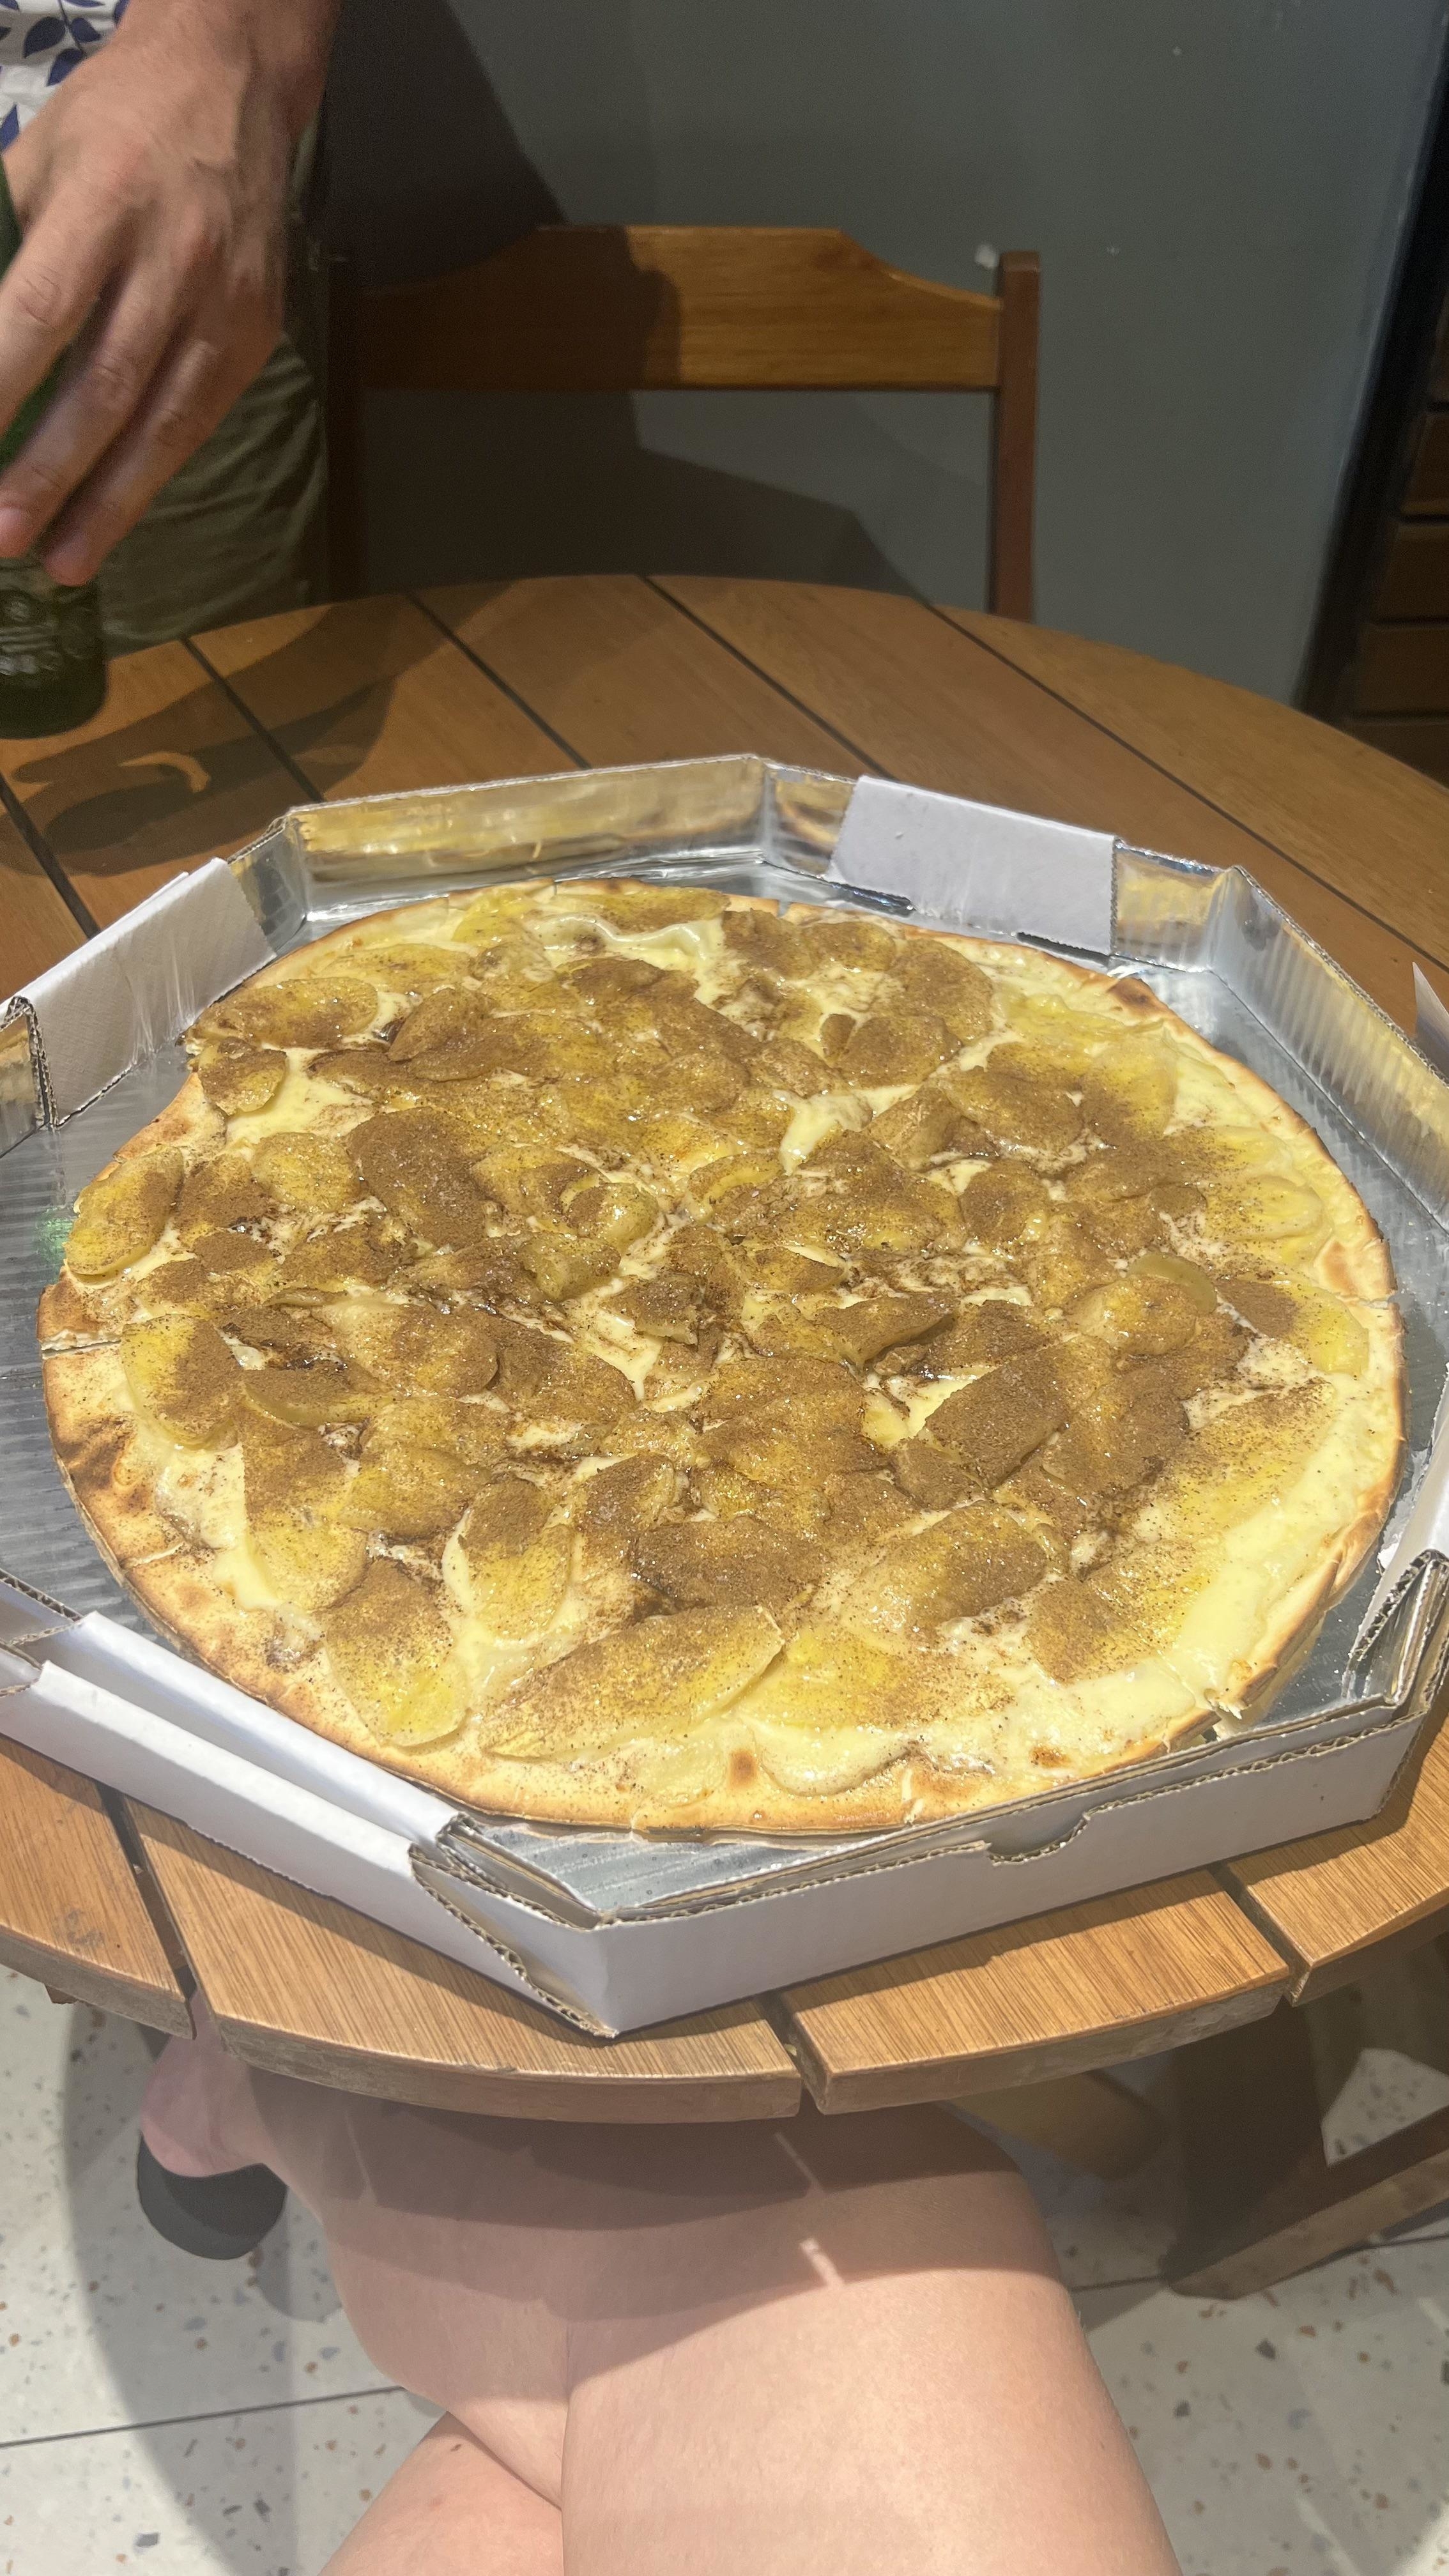 A pizza pie with banana slices and LOTS of cinnamon on a table